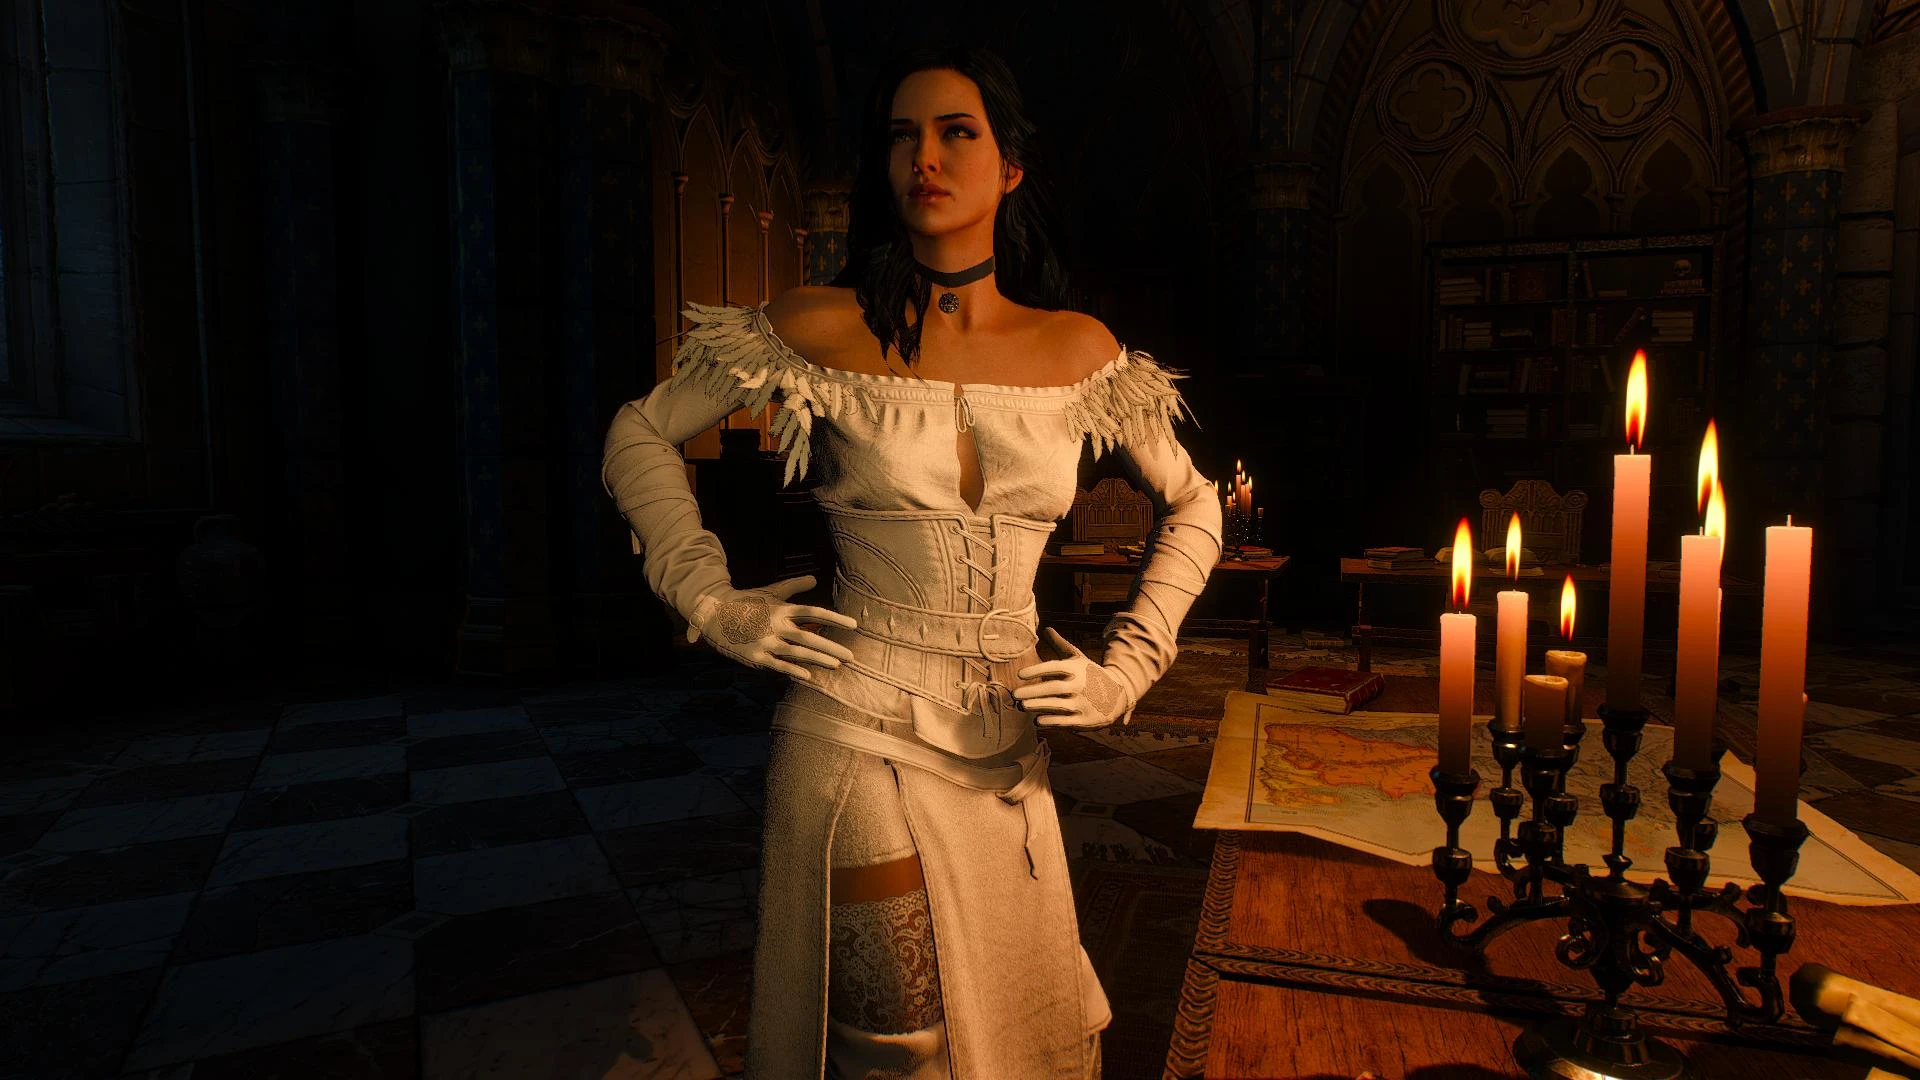 The witcher 3 alternative look for yennefer фото 81